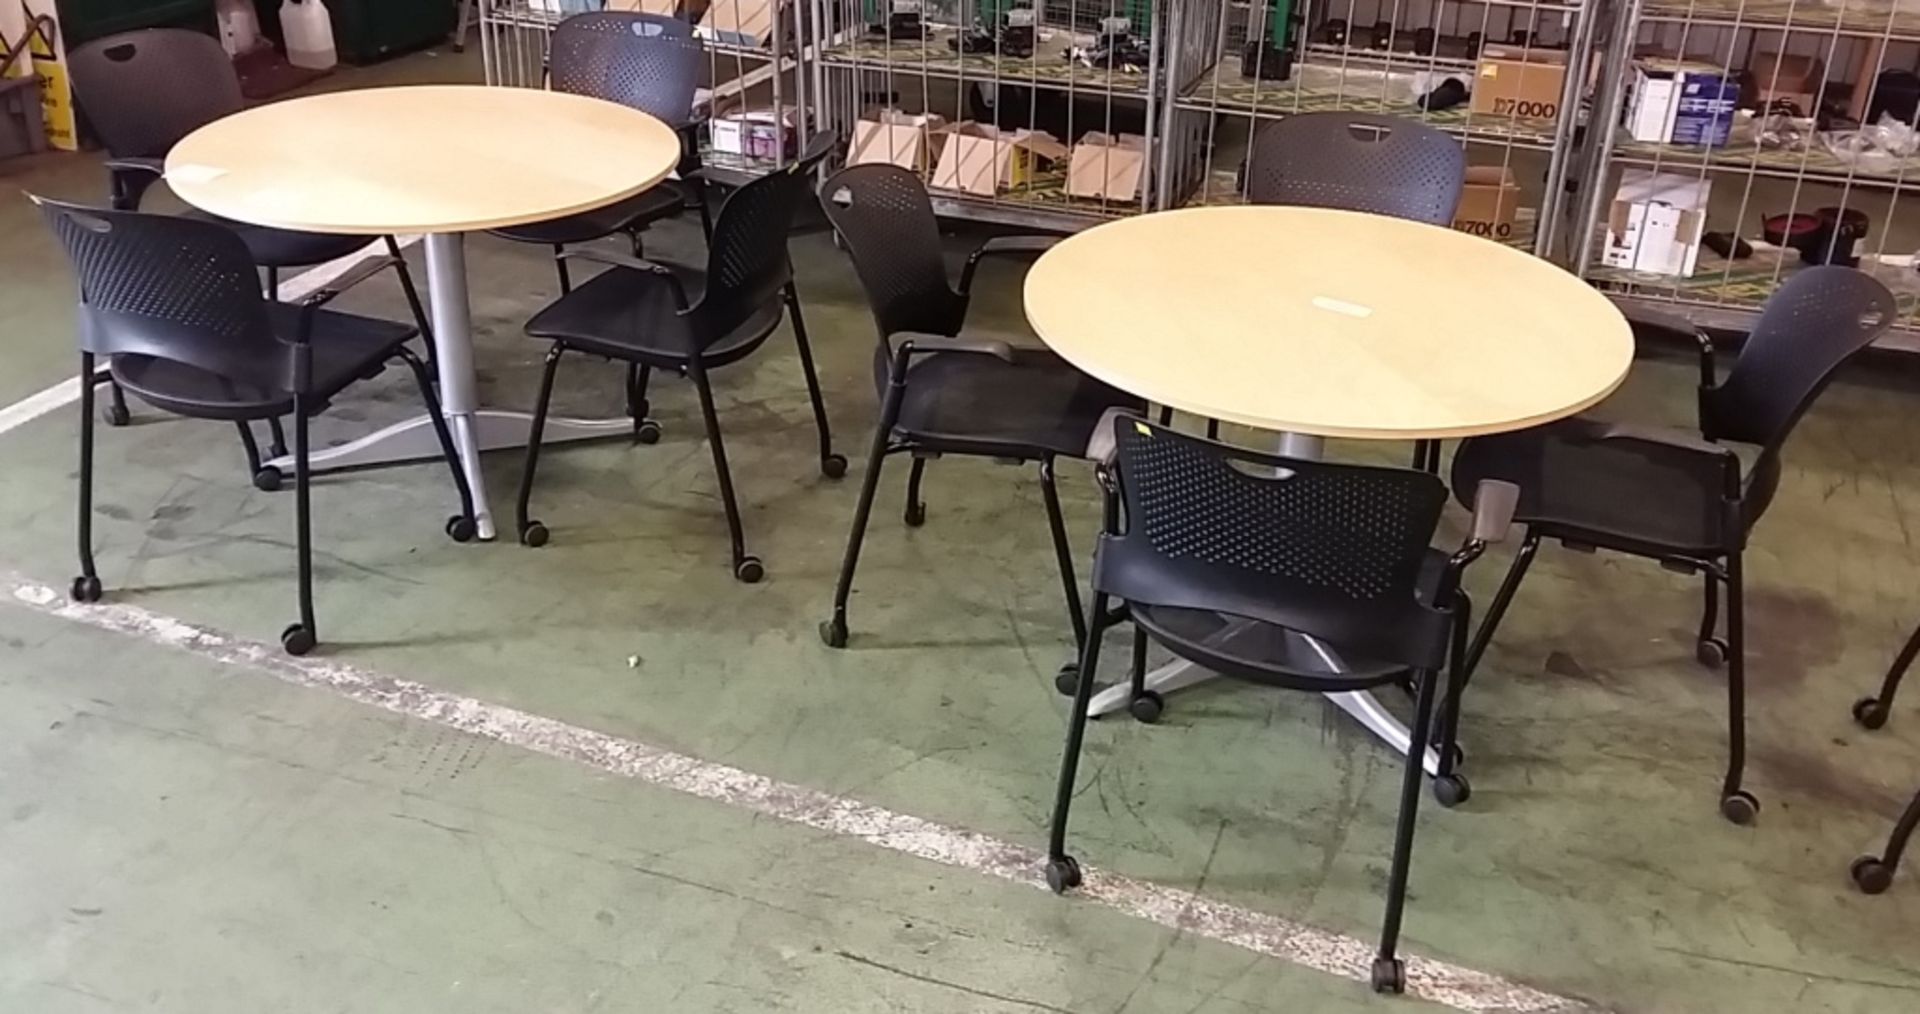 2x Round tables with 8 chairs